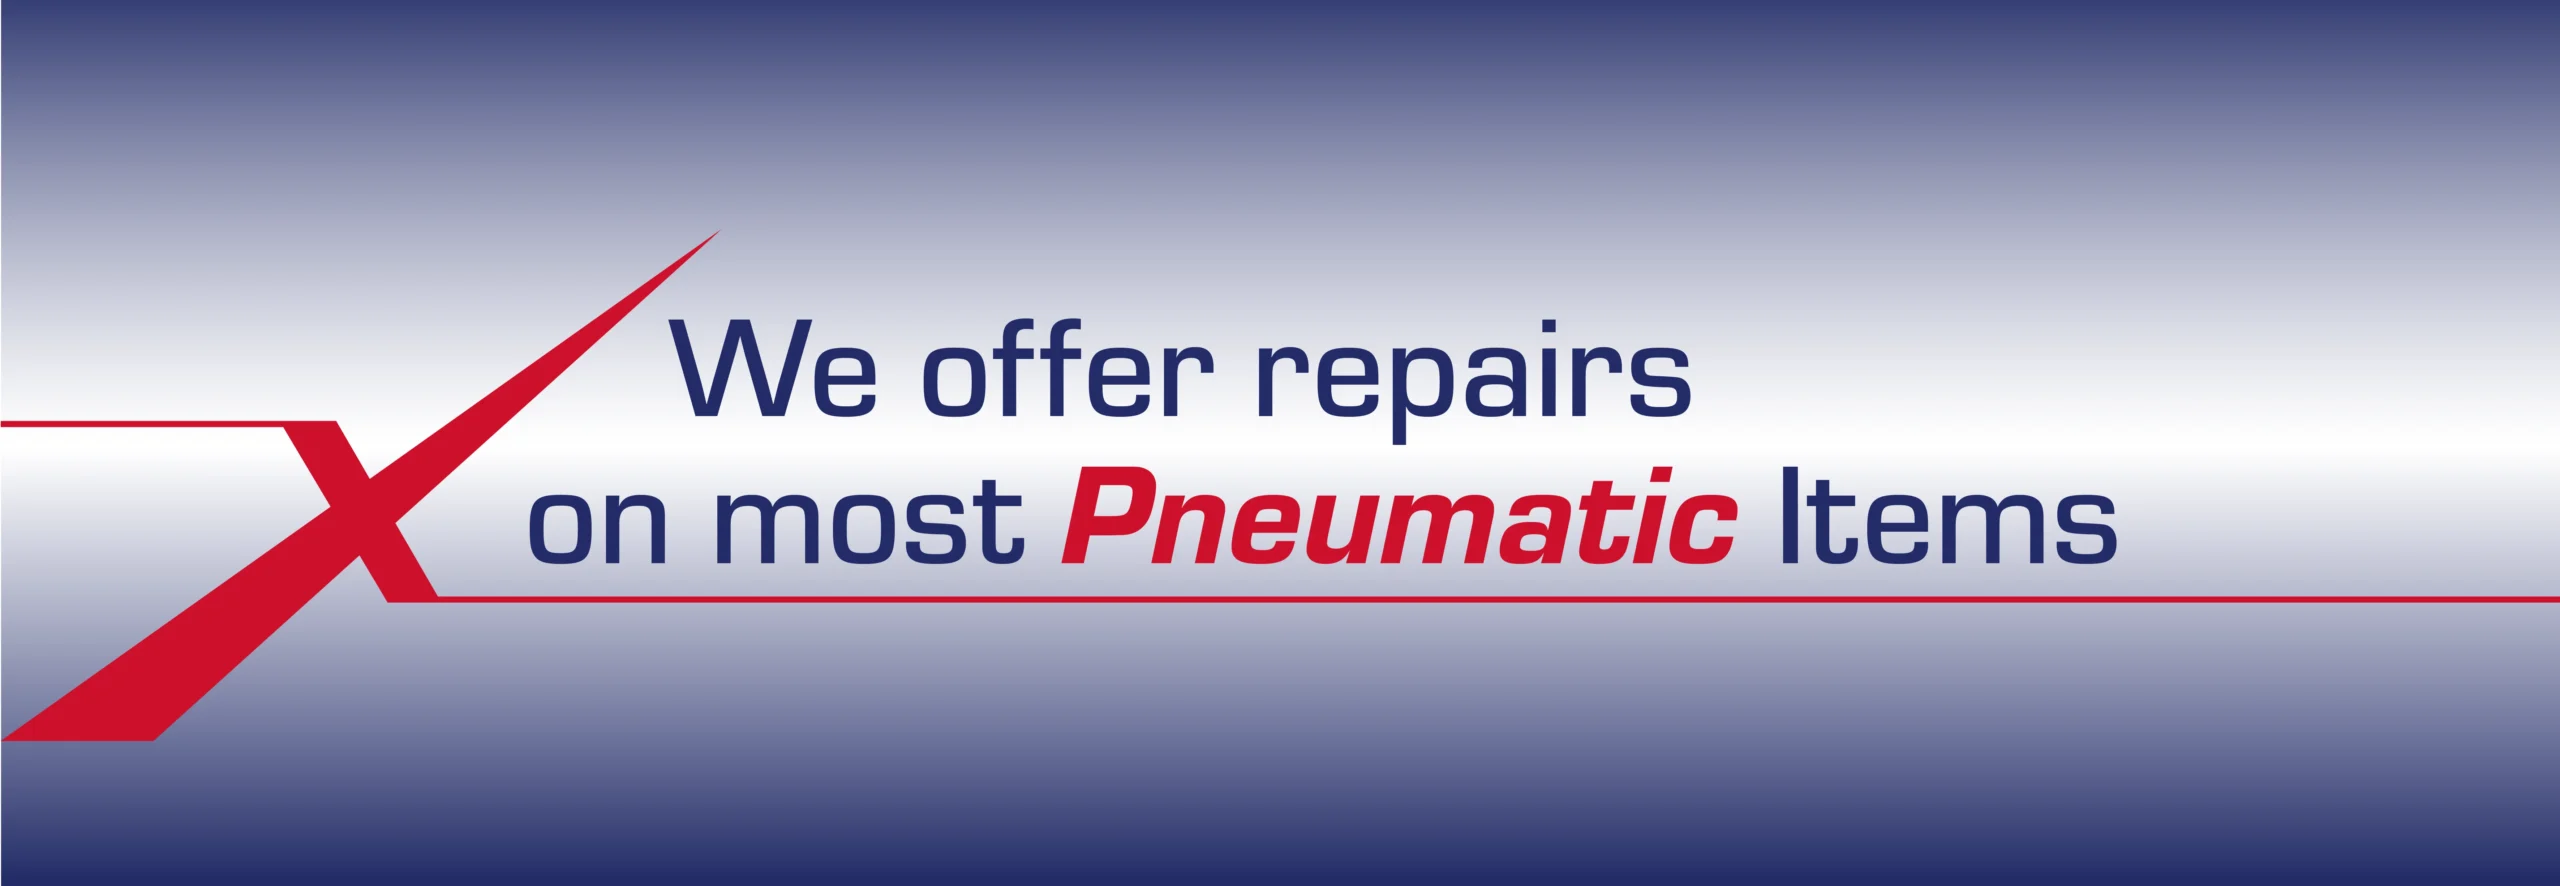 We offer repairs on most Pneumatic Items